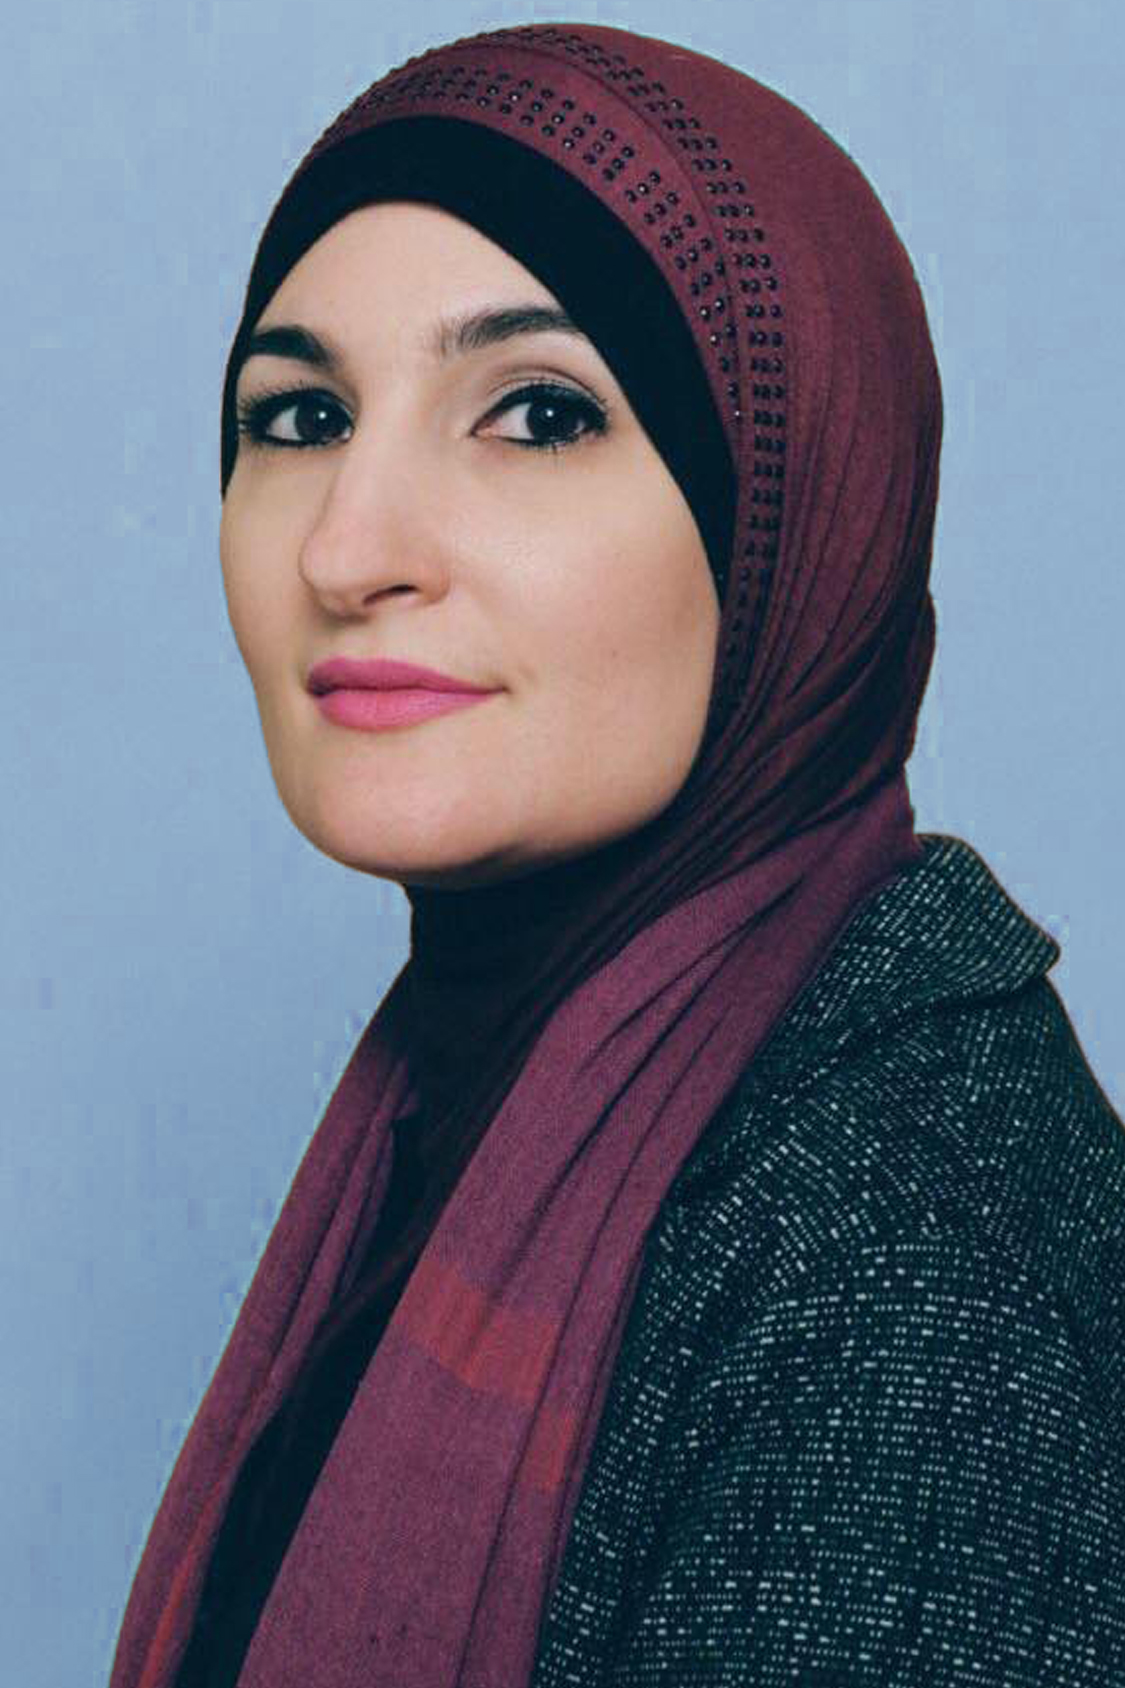 Linda Sarsour photo courtesy of her Official Facebook Page